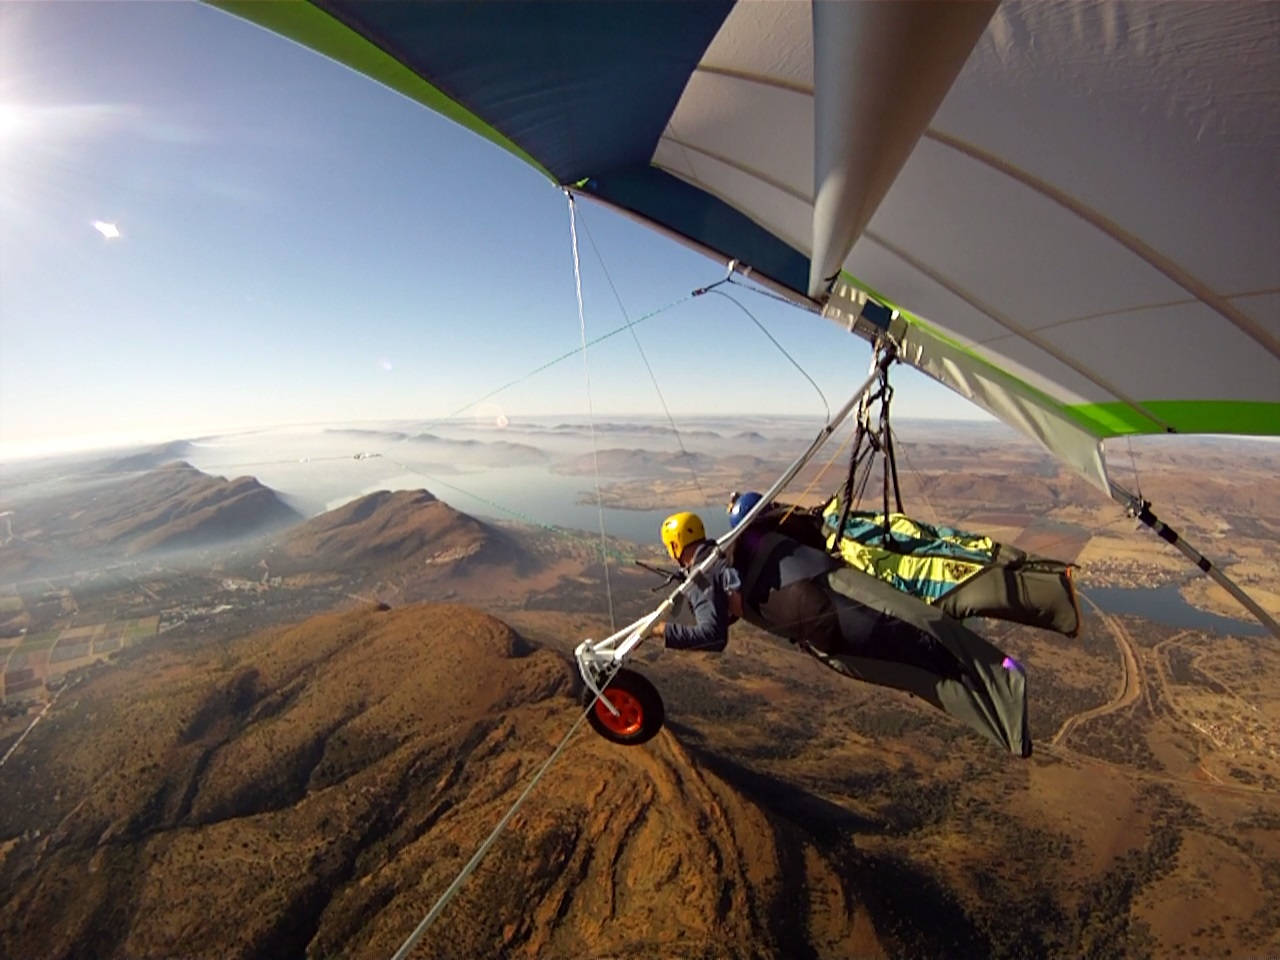 Tandem Hang Gliding Mountains South Africa Wallpaper